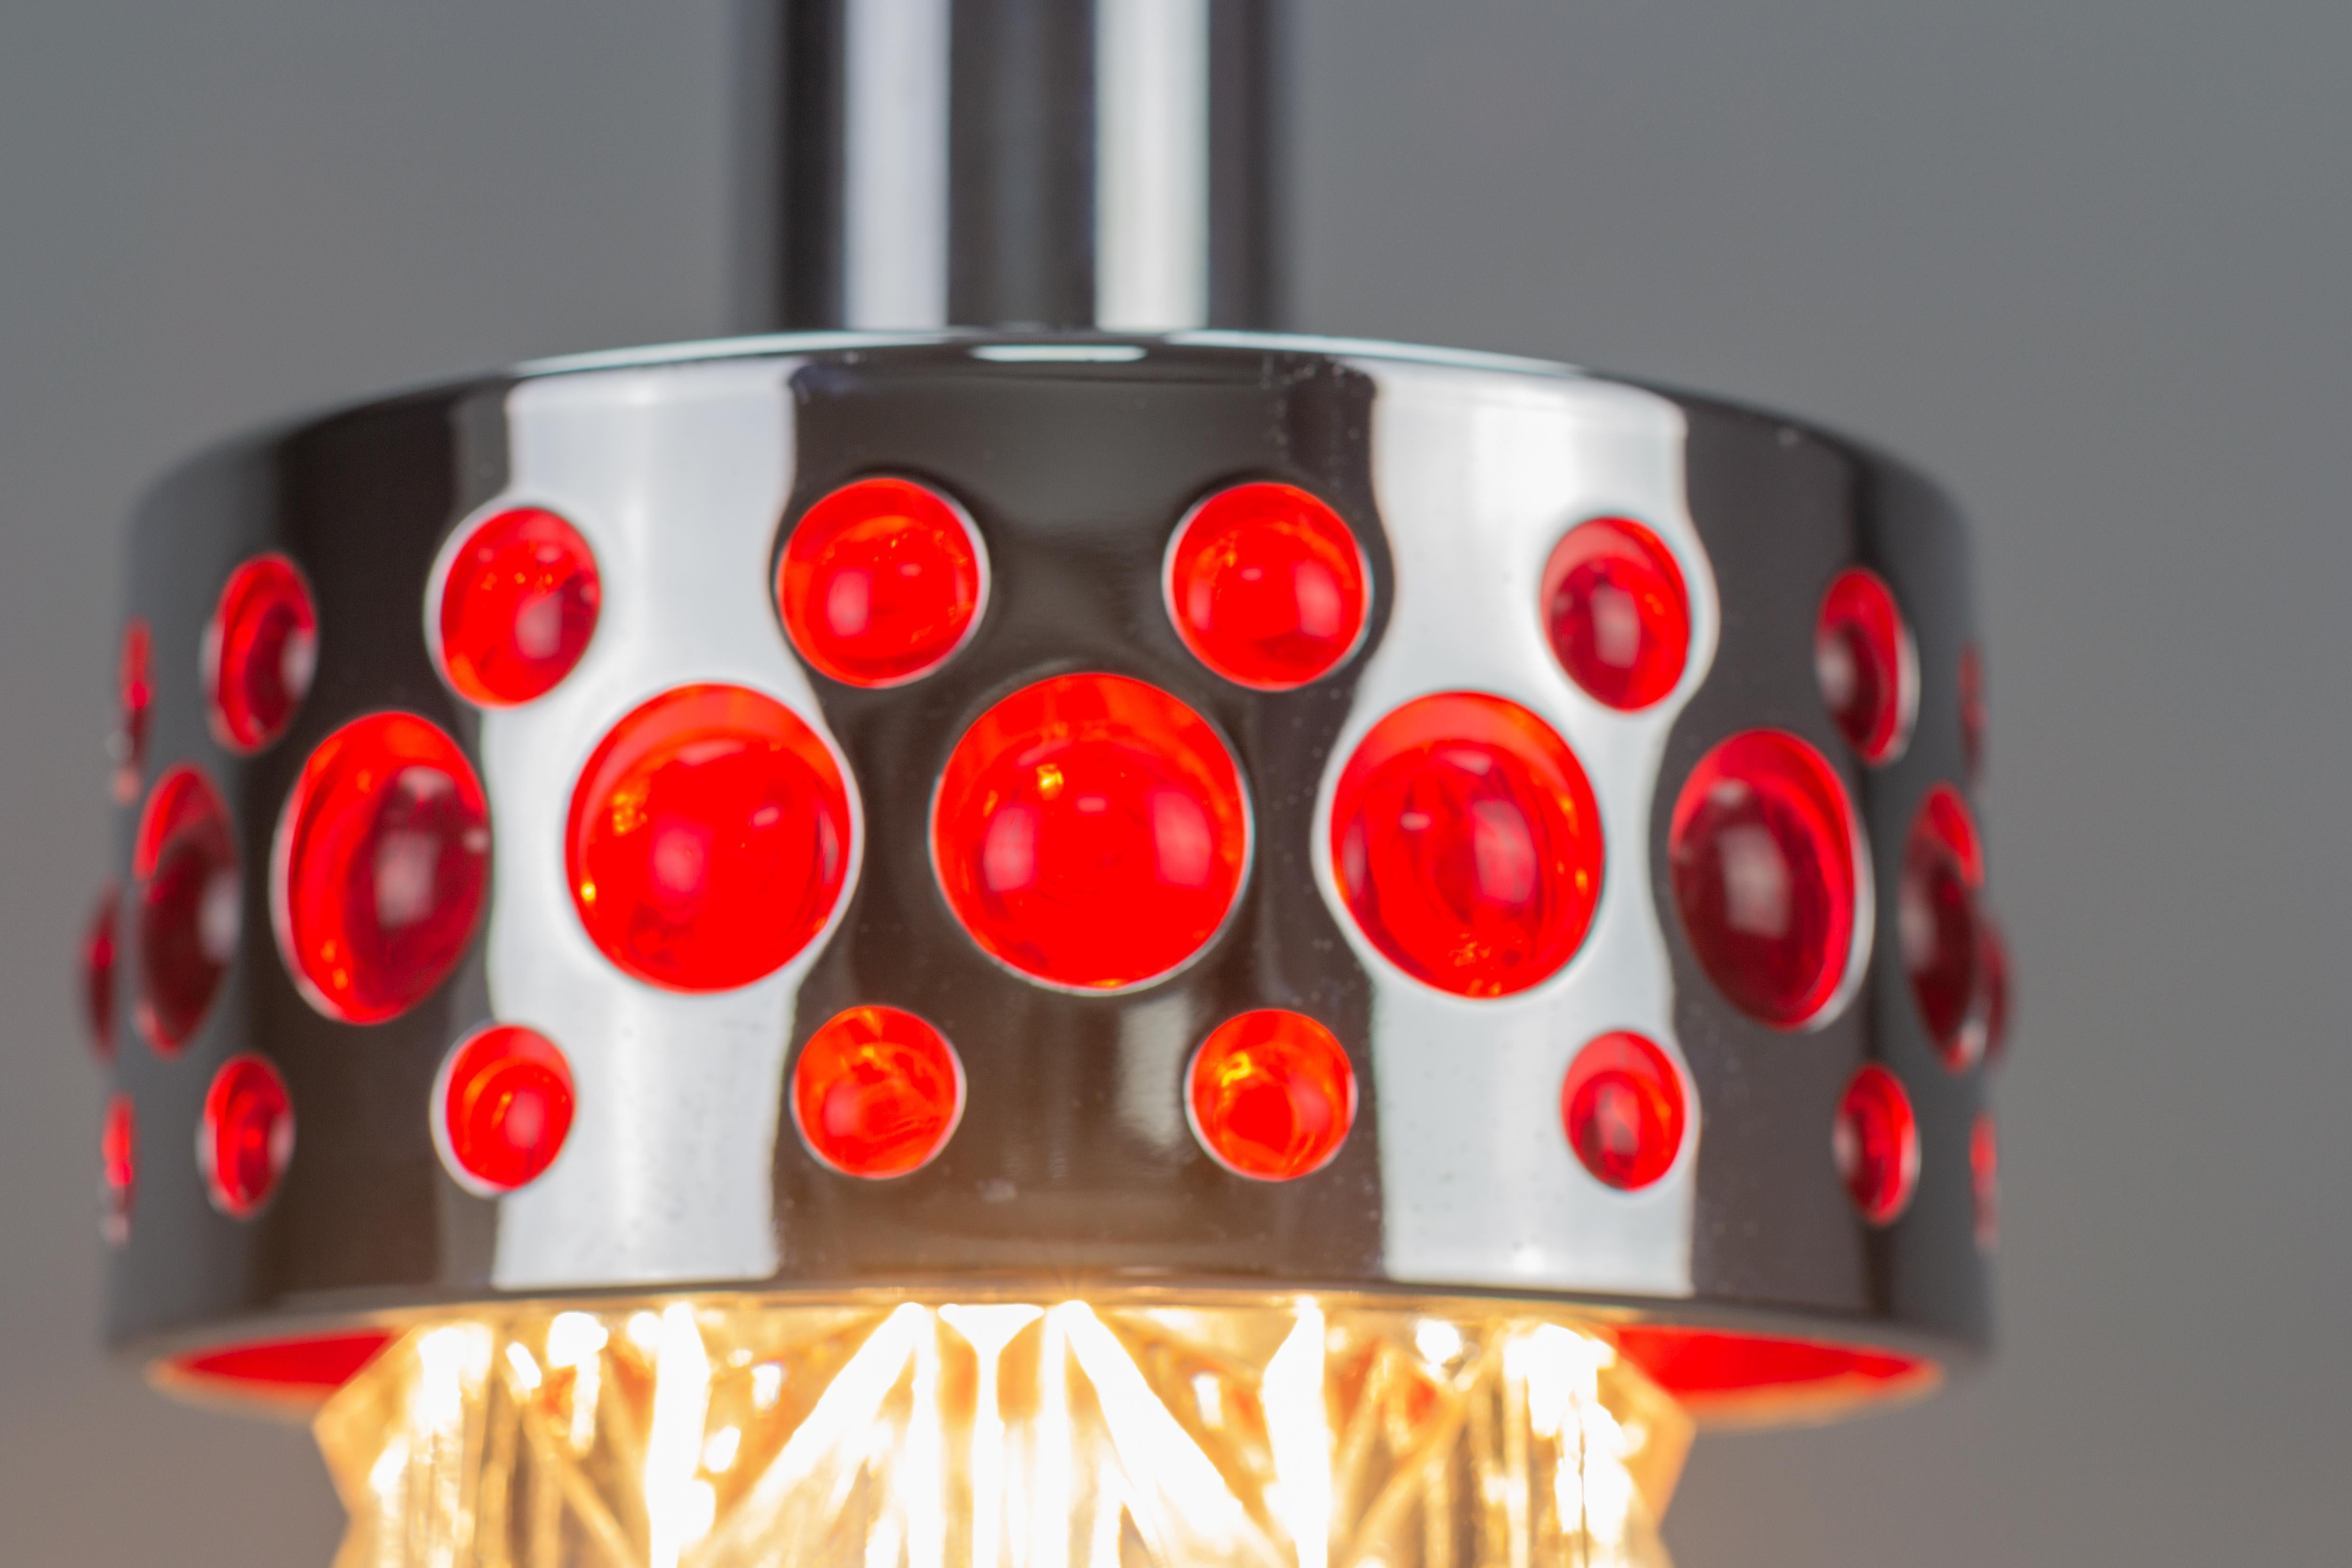 Late 20th Century German Mid-Century Modern Chrome and Red Pendant Light by Richard Essig, 1970s For Sale